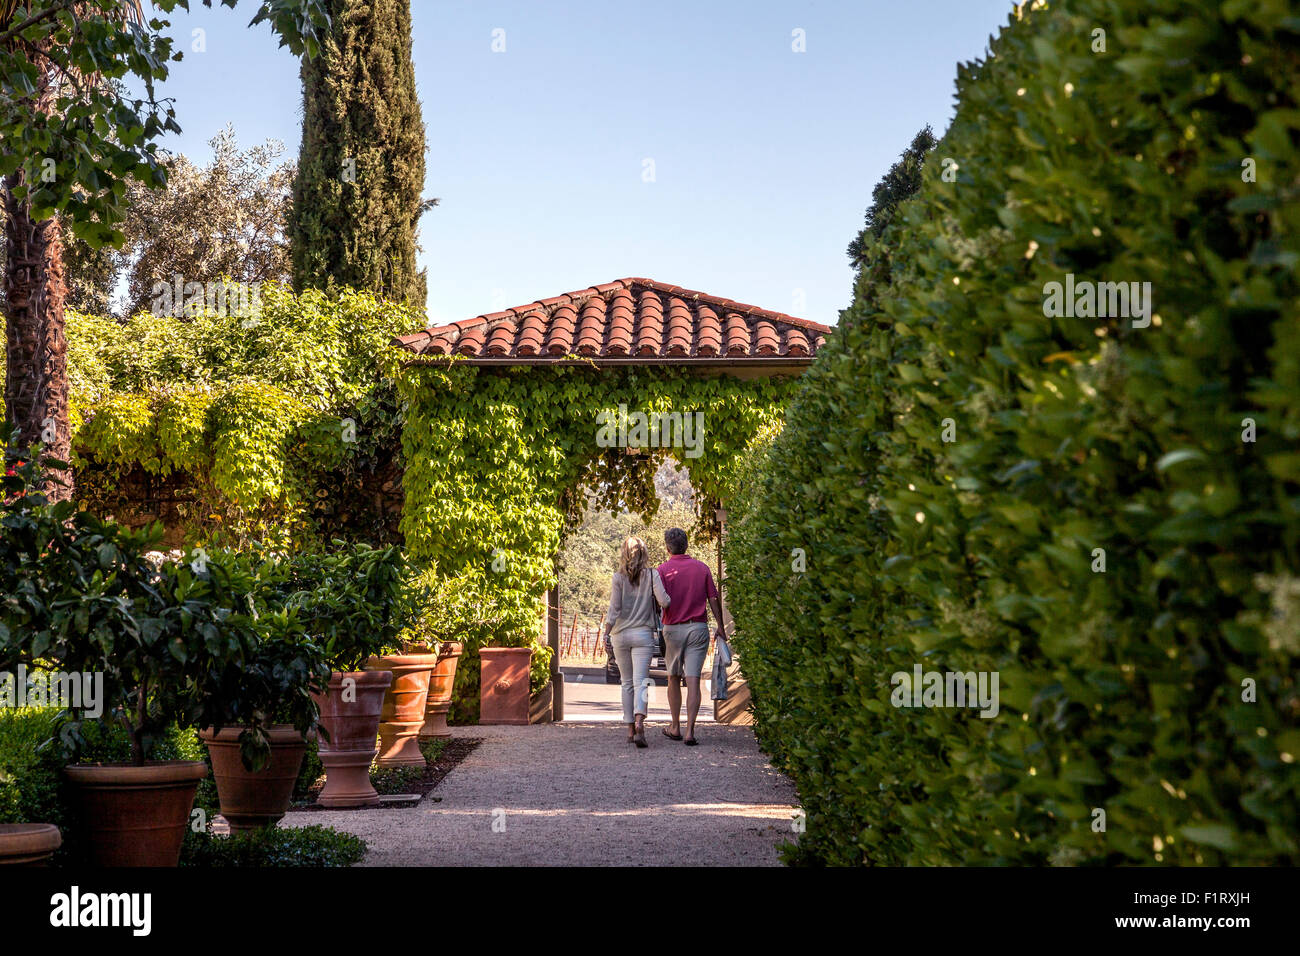 Couple walking inside the garden of Chateau St. Jean Estate vineyards and winery, Kenwood, Sonoma, California, USA Stock Photo